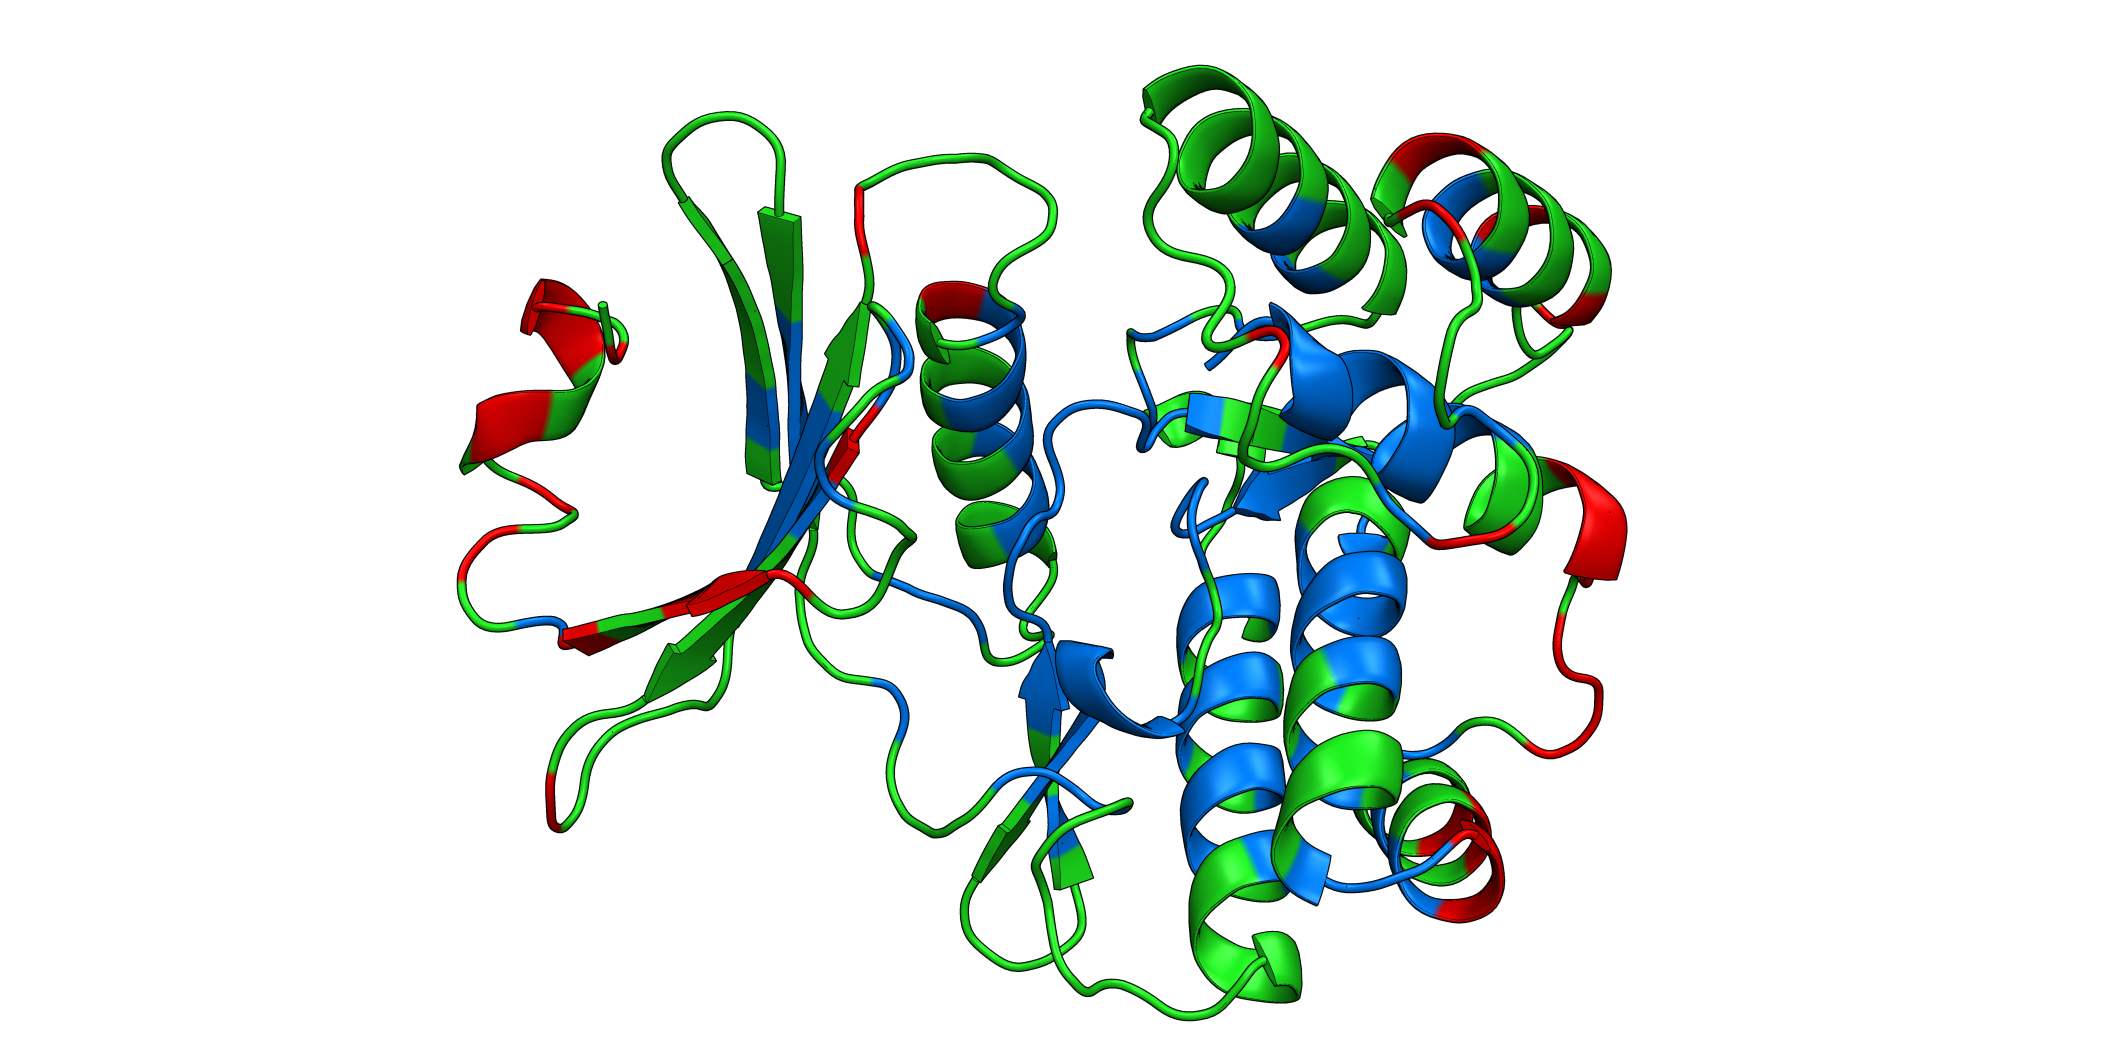 _images/aph_pymol.png